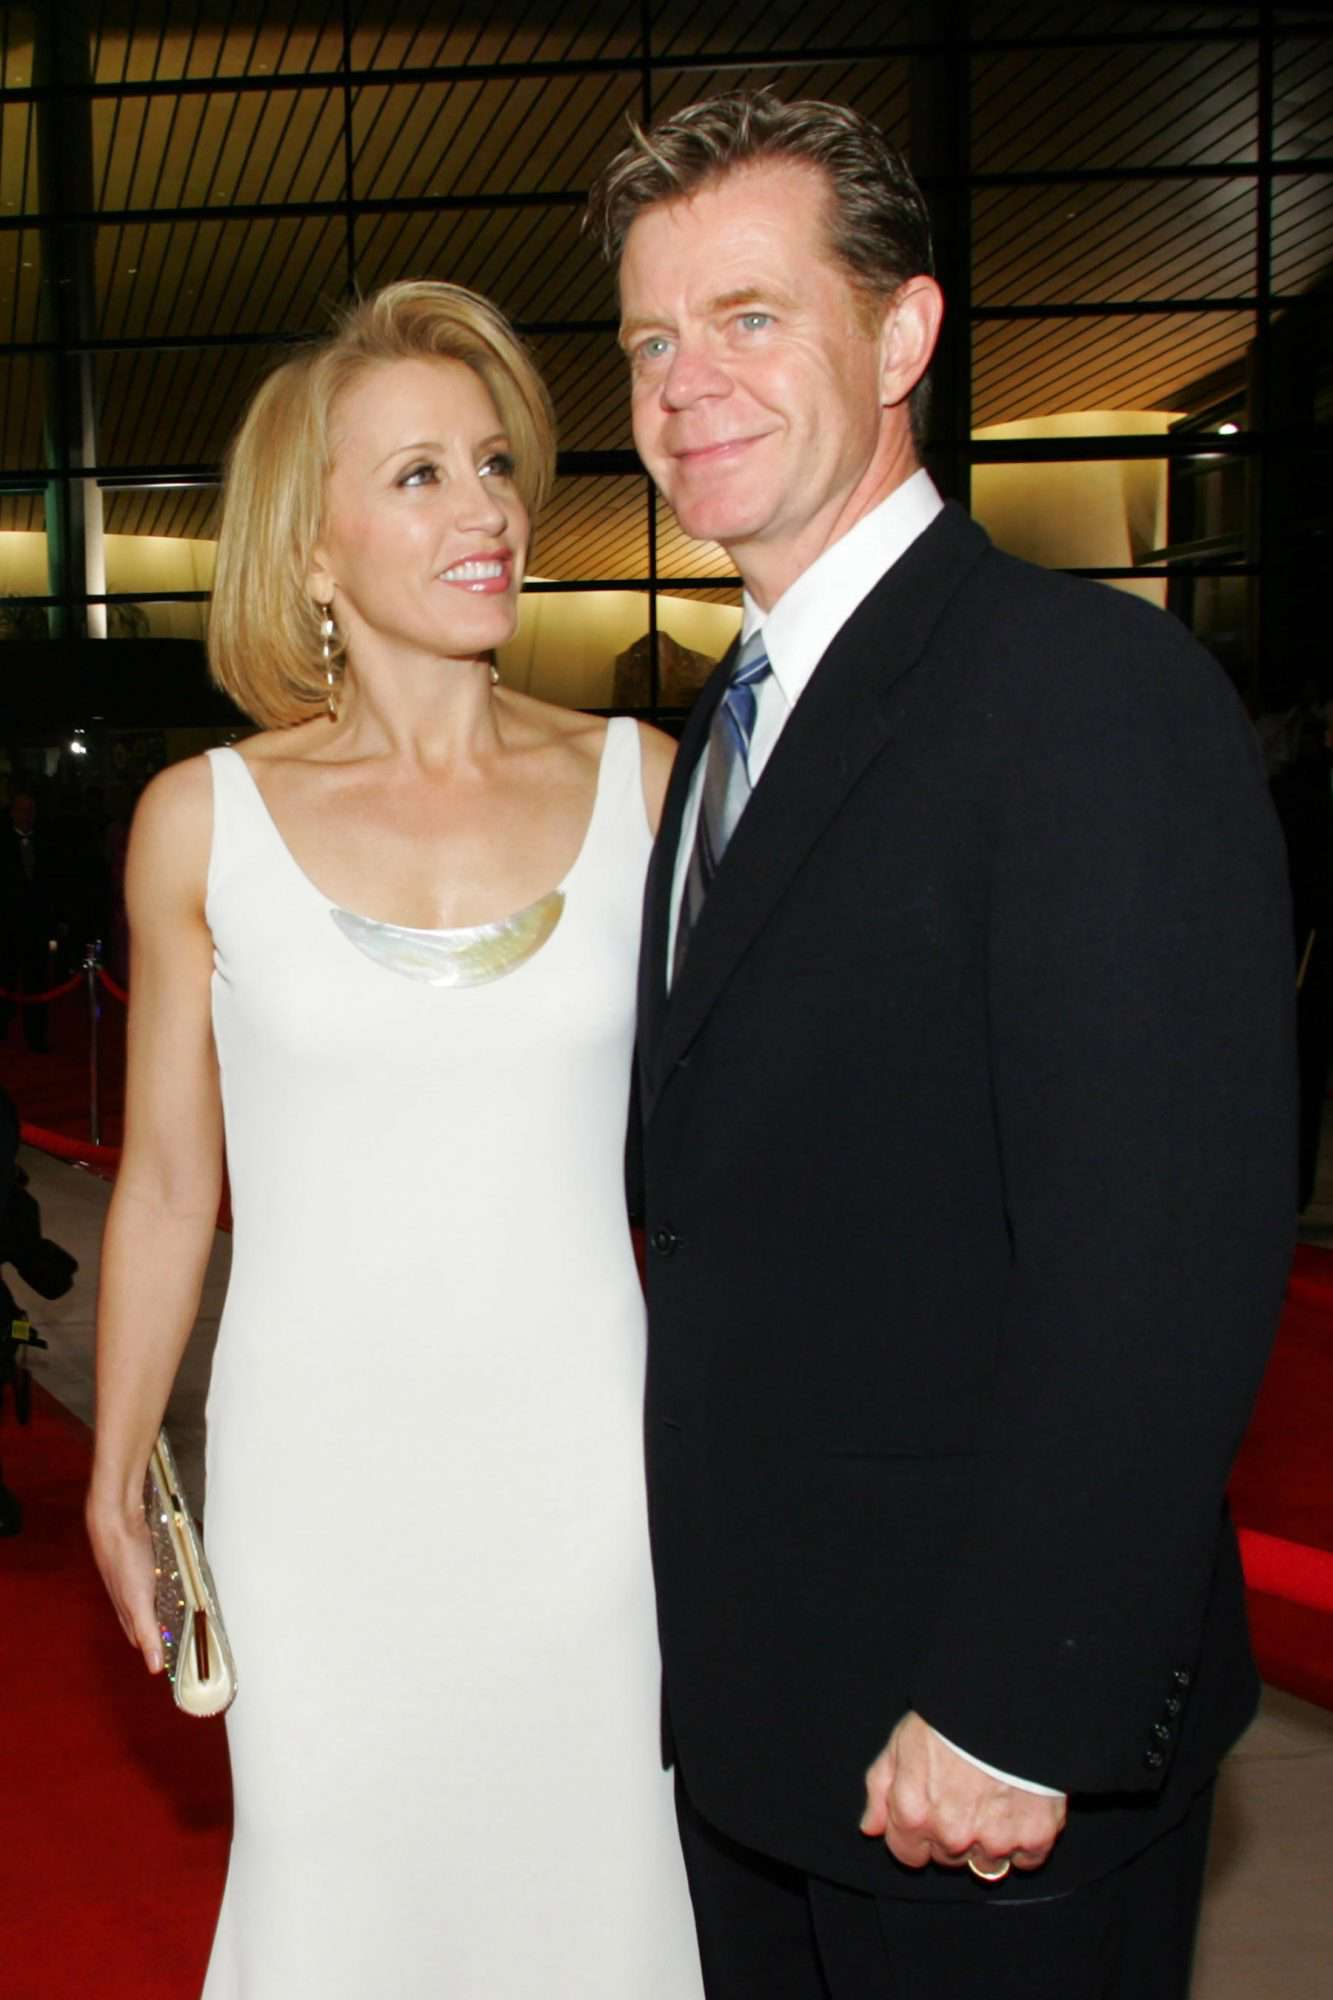 Felicity Huffman and William H. Macy at the&nbsp;17th Annual Palm Springs International Film Festival Gala Awards Presentation&nbsp;on&nbsp;January 7, 2006